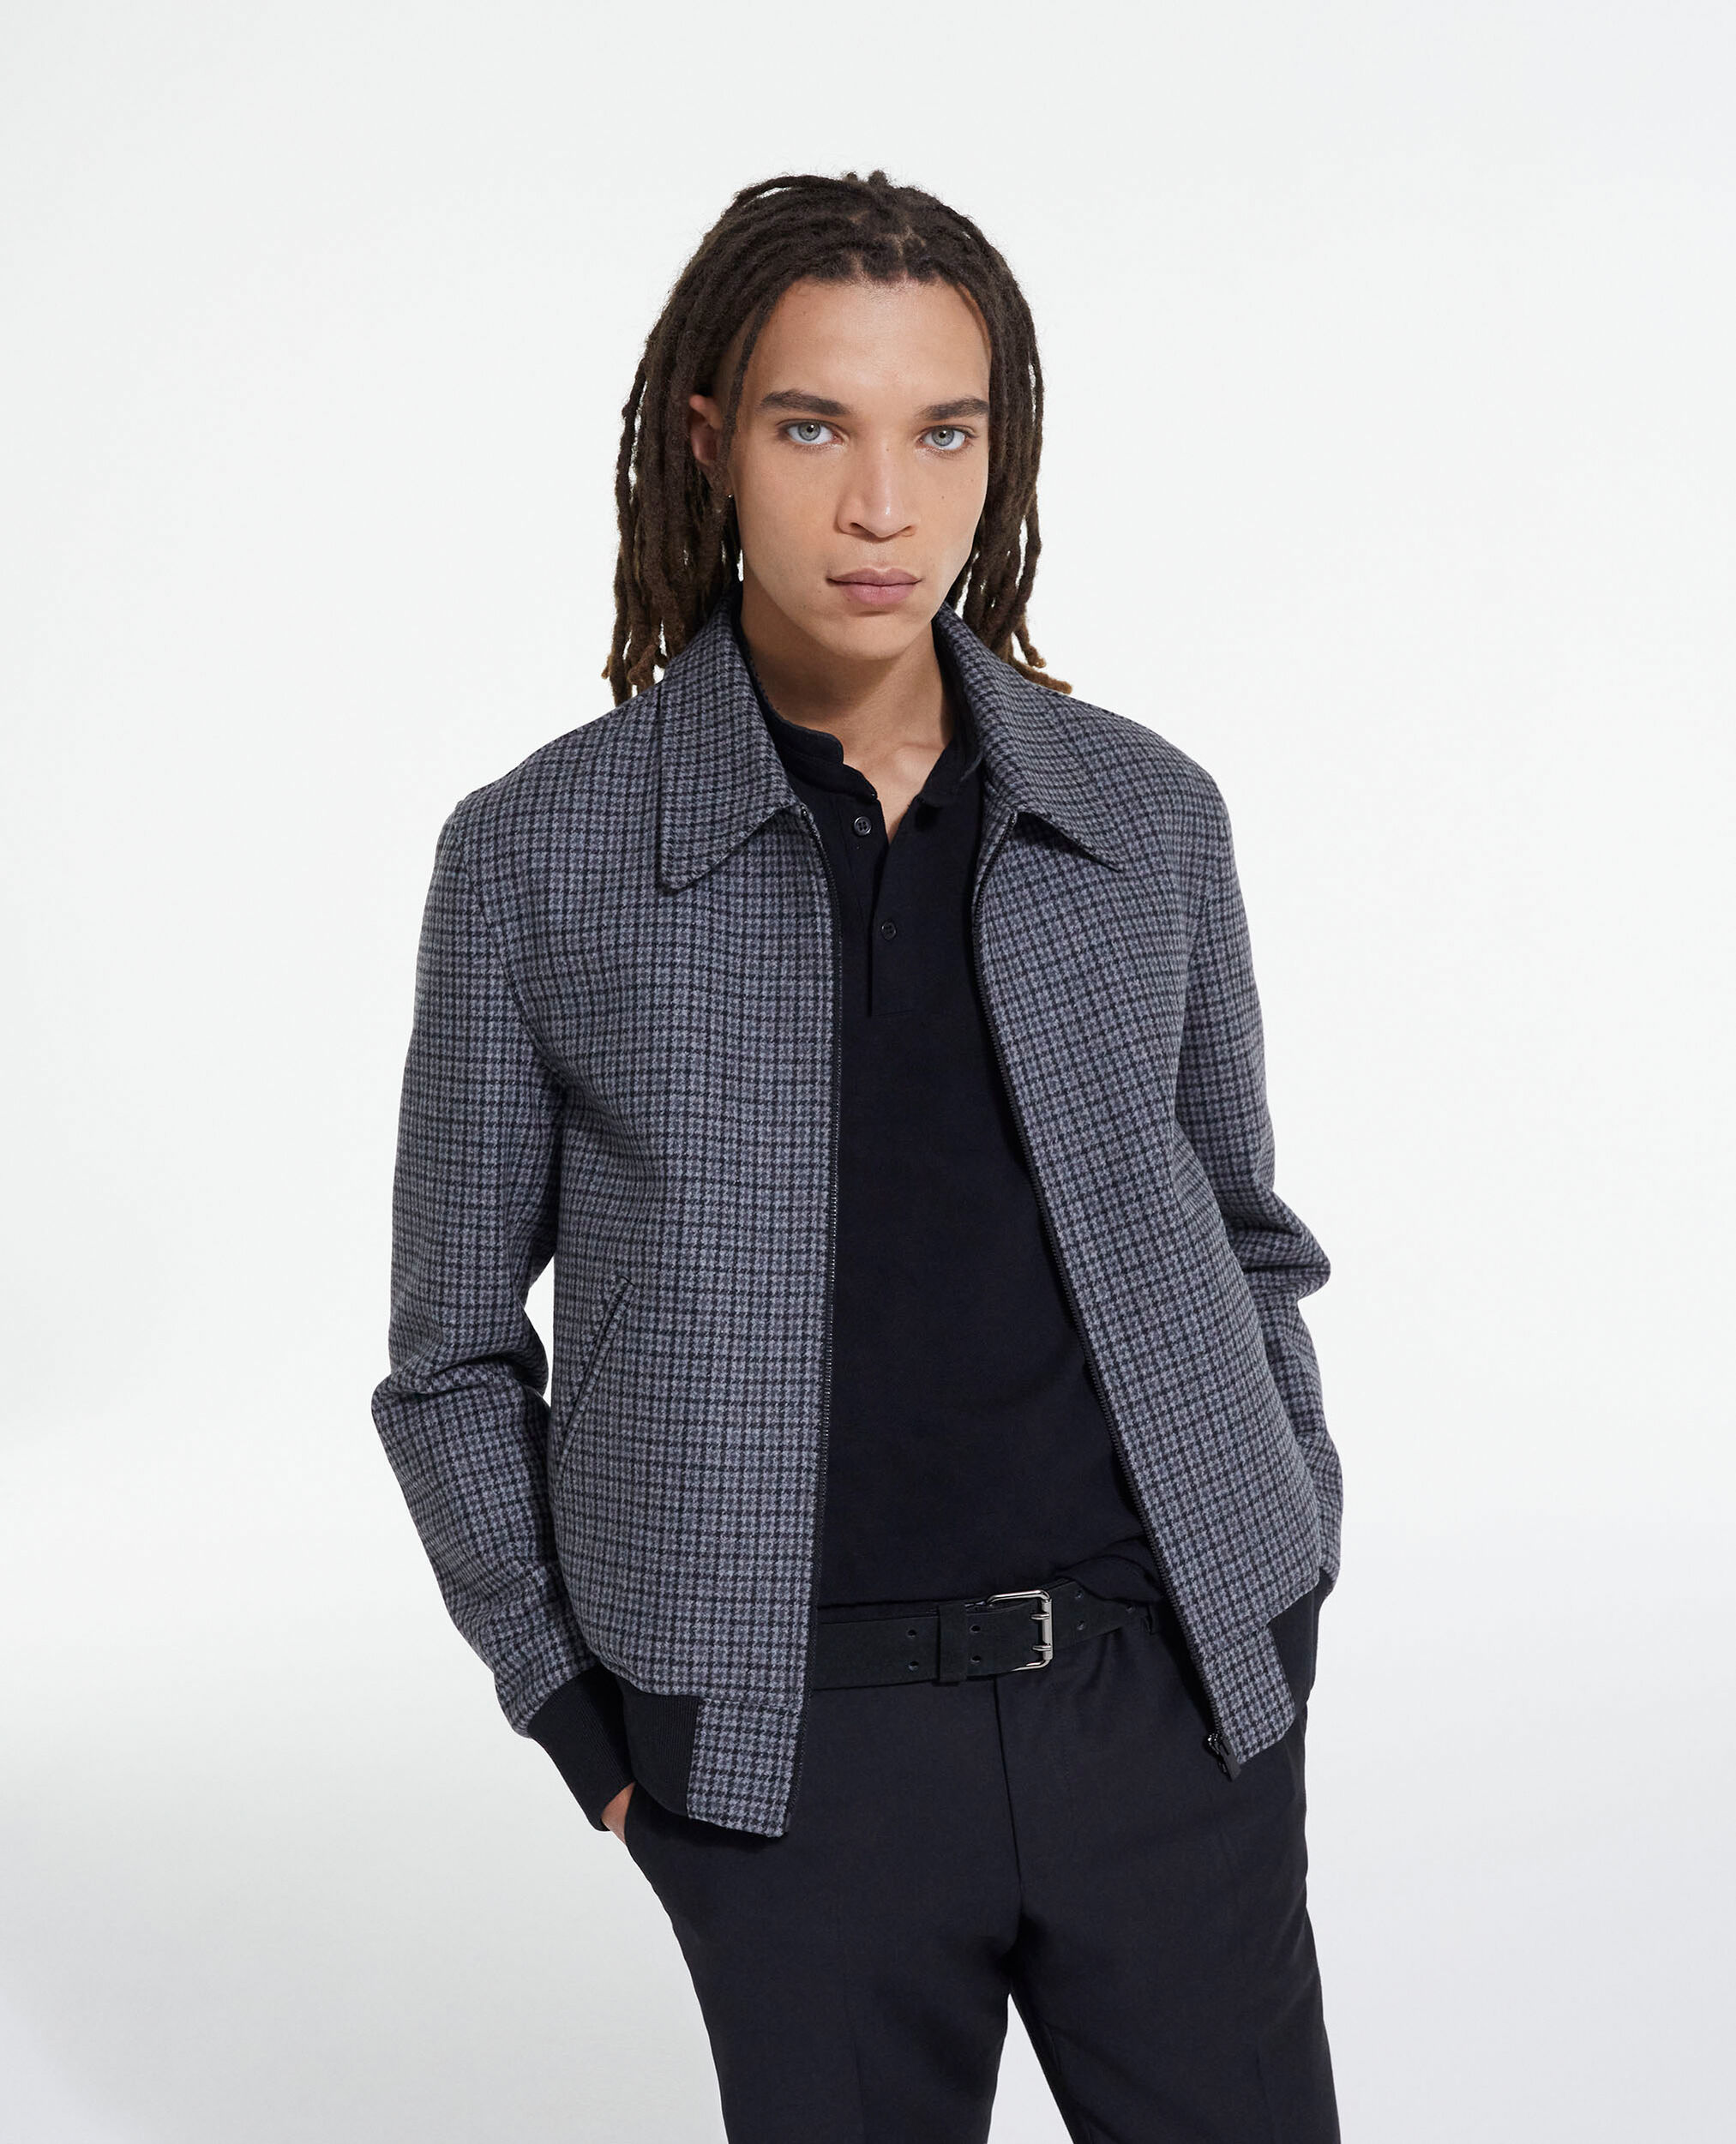 Check wool jacket with pockets, GREY BLACK, hi-res image number null